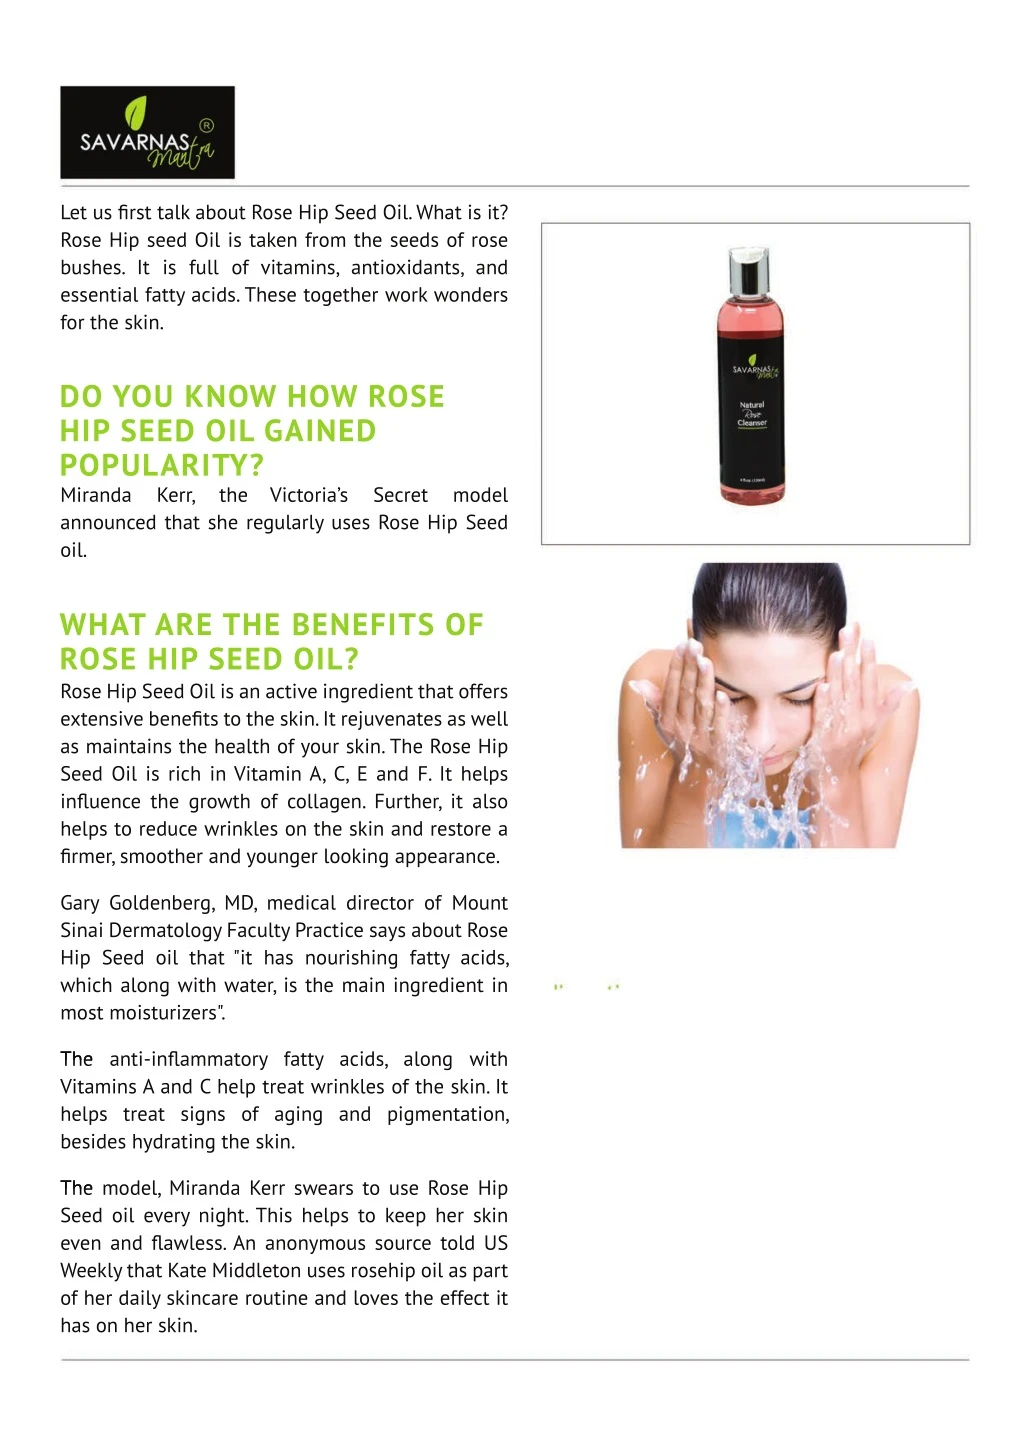 let us first talk about rose hip seed oil what